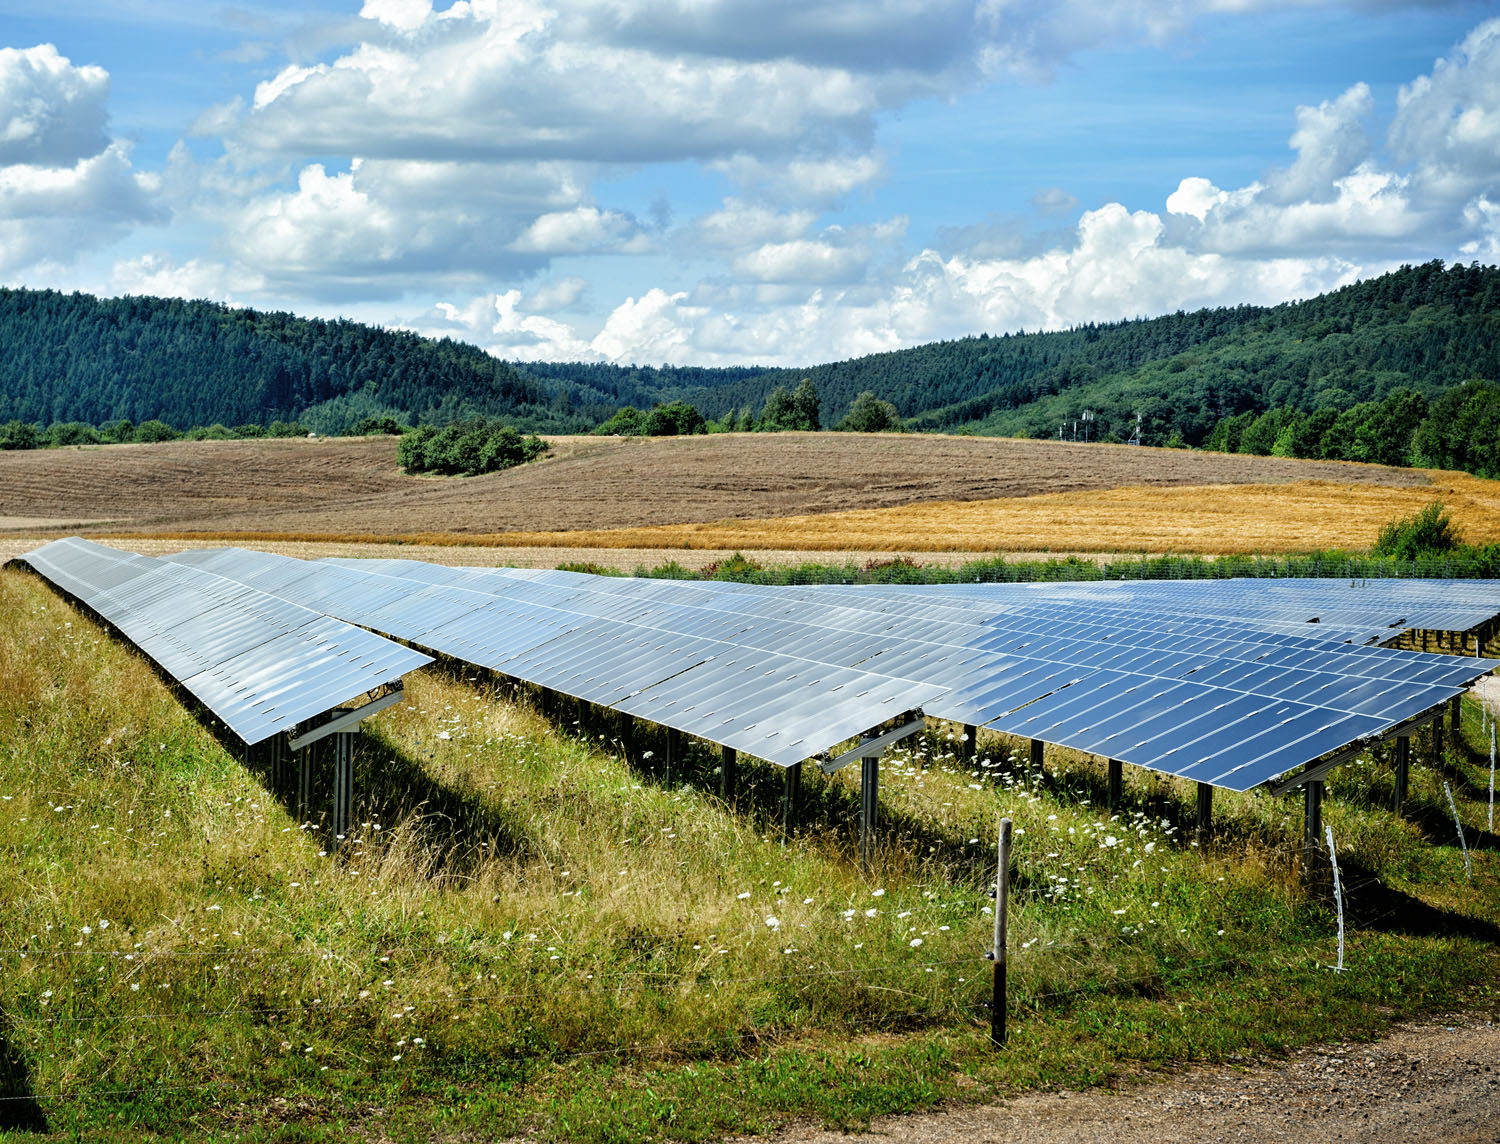 Landscape with solar energy field